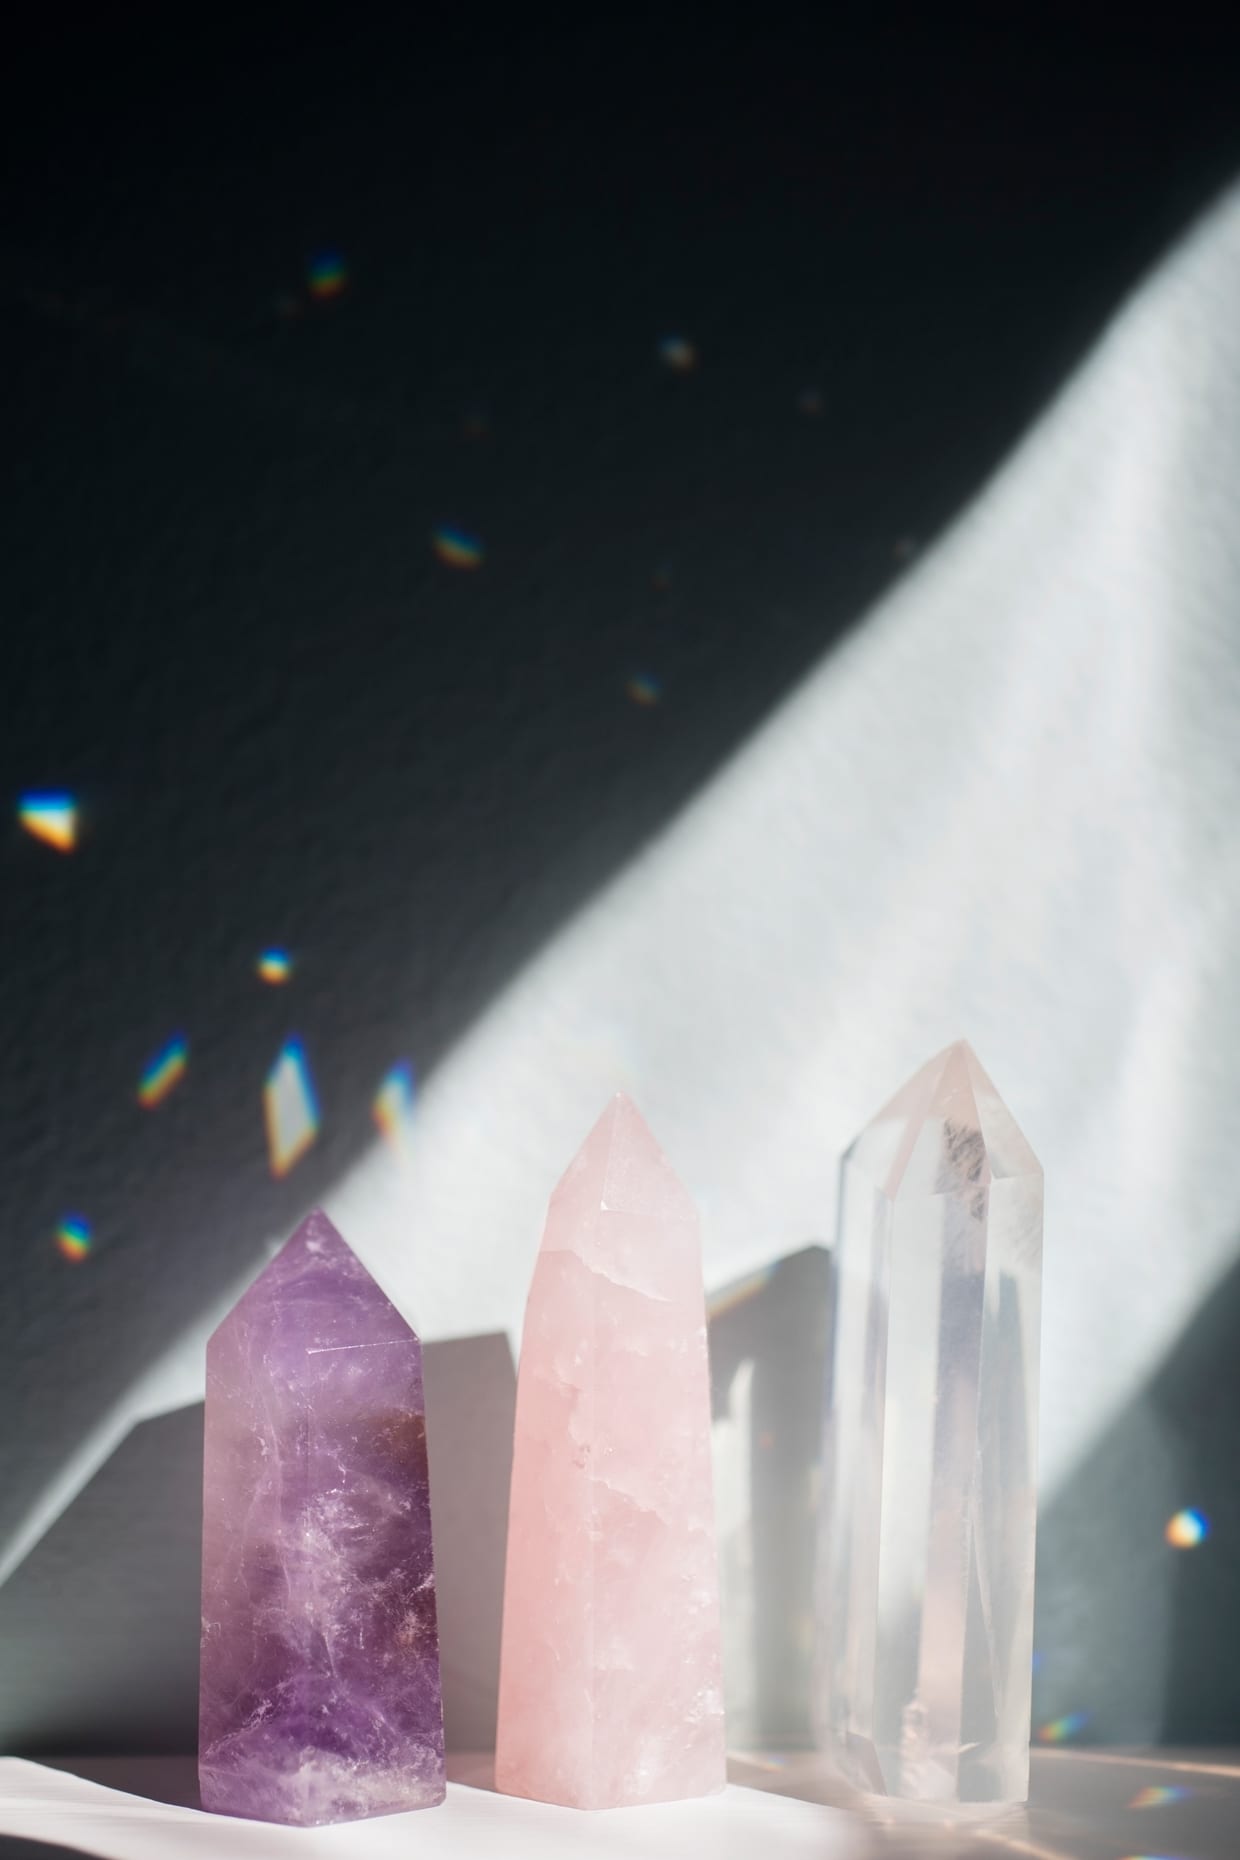 An amethyst, rose quartz and clear quartz crystal in a sliver of sunlight.